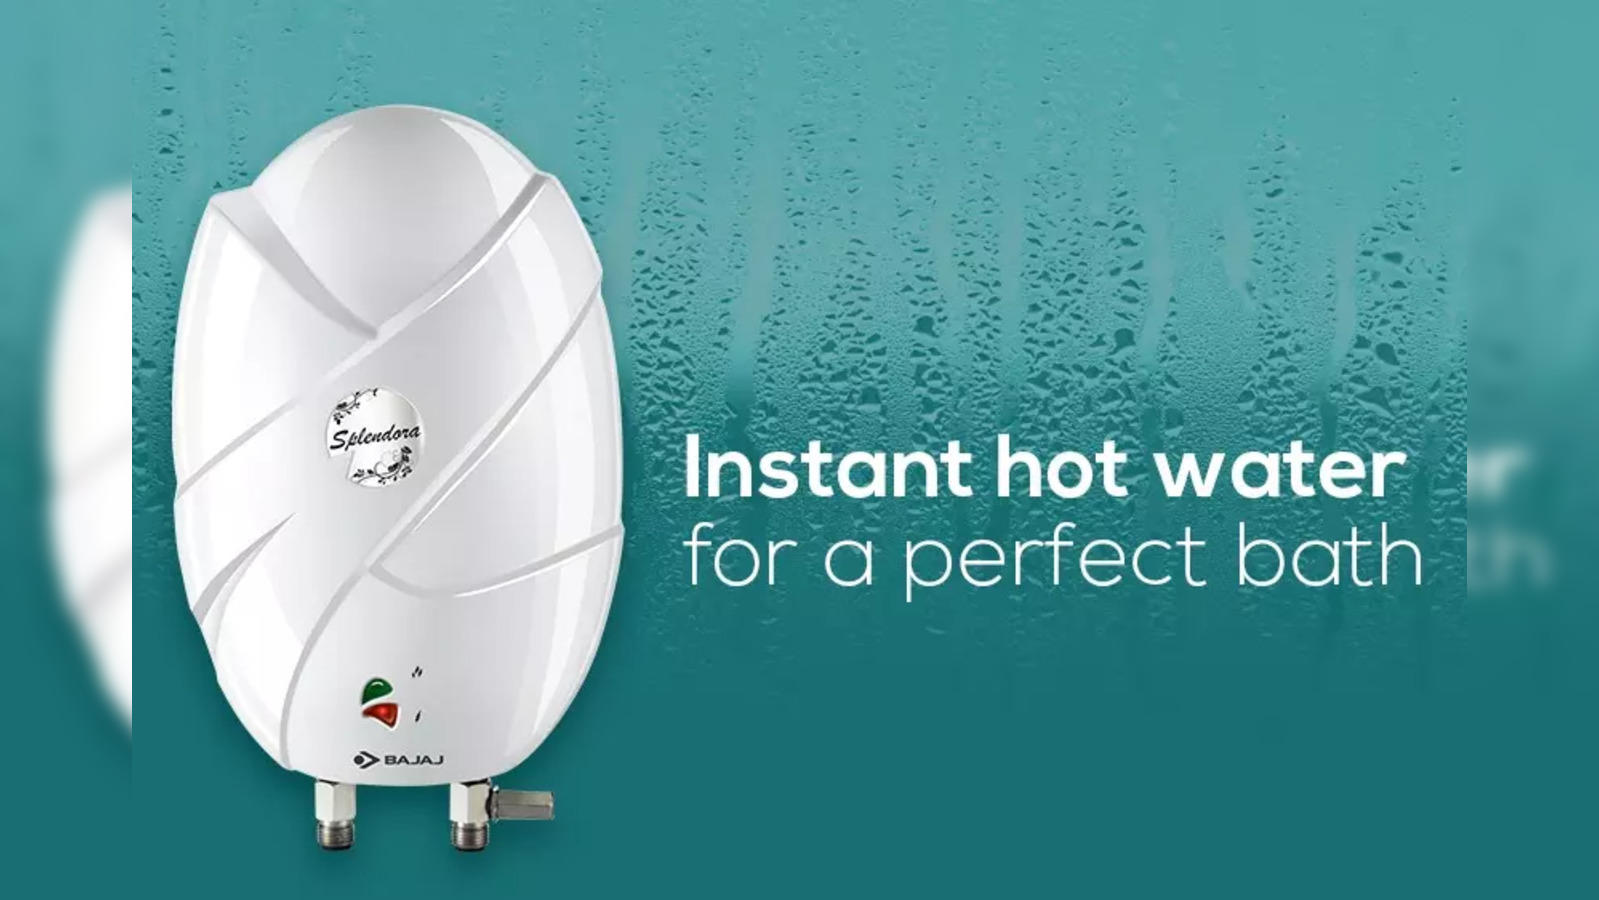 With Crompton best water heater in India beat bathing blues